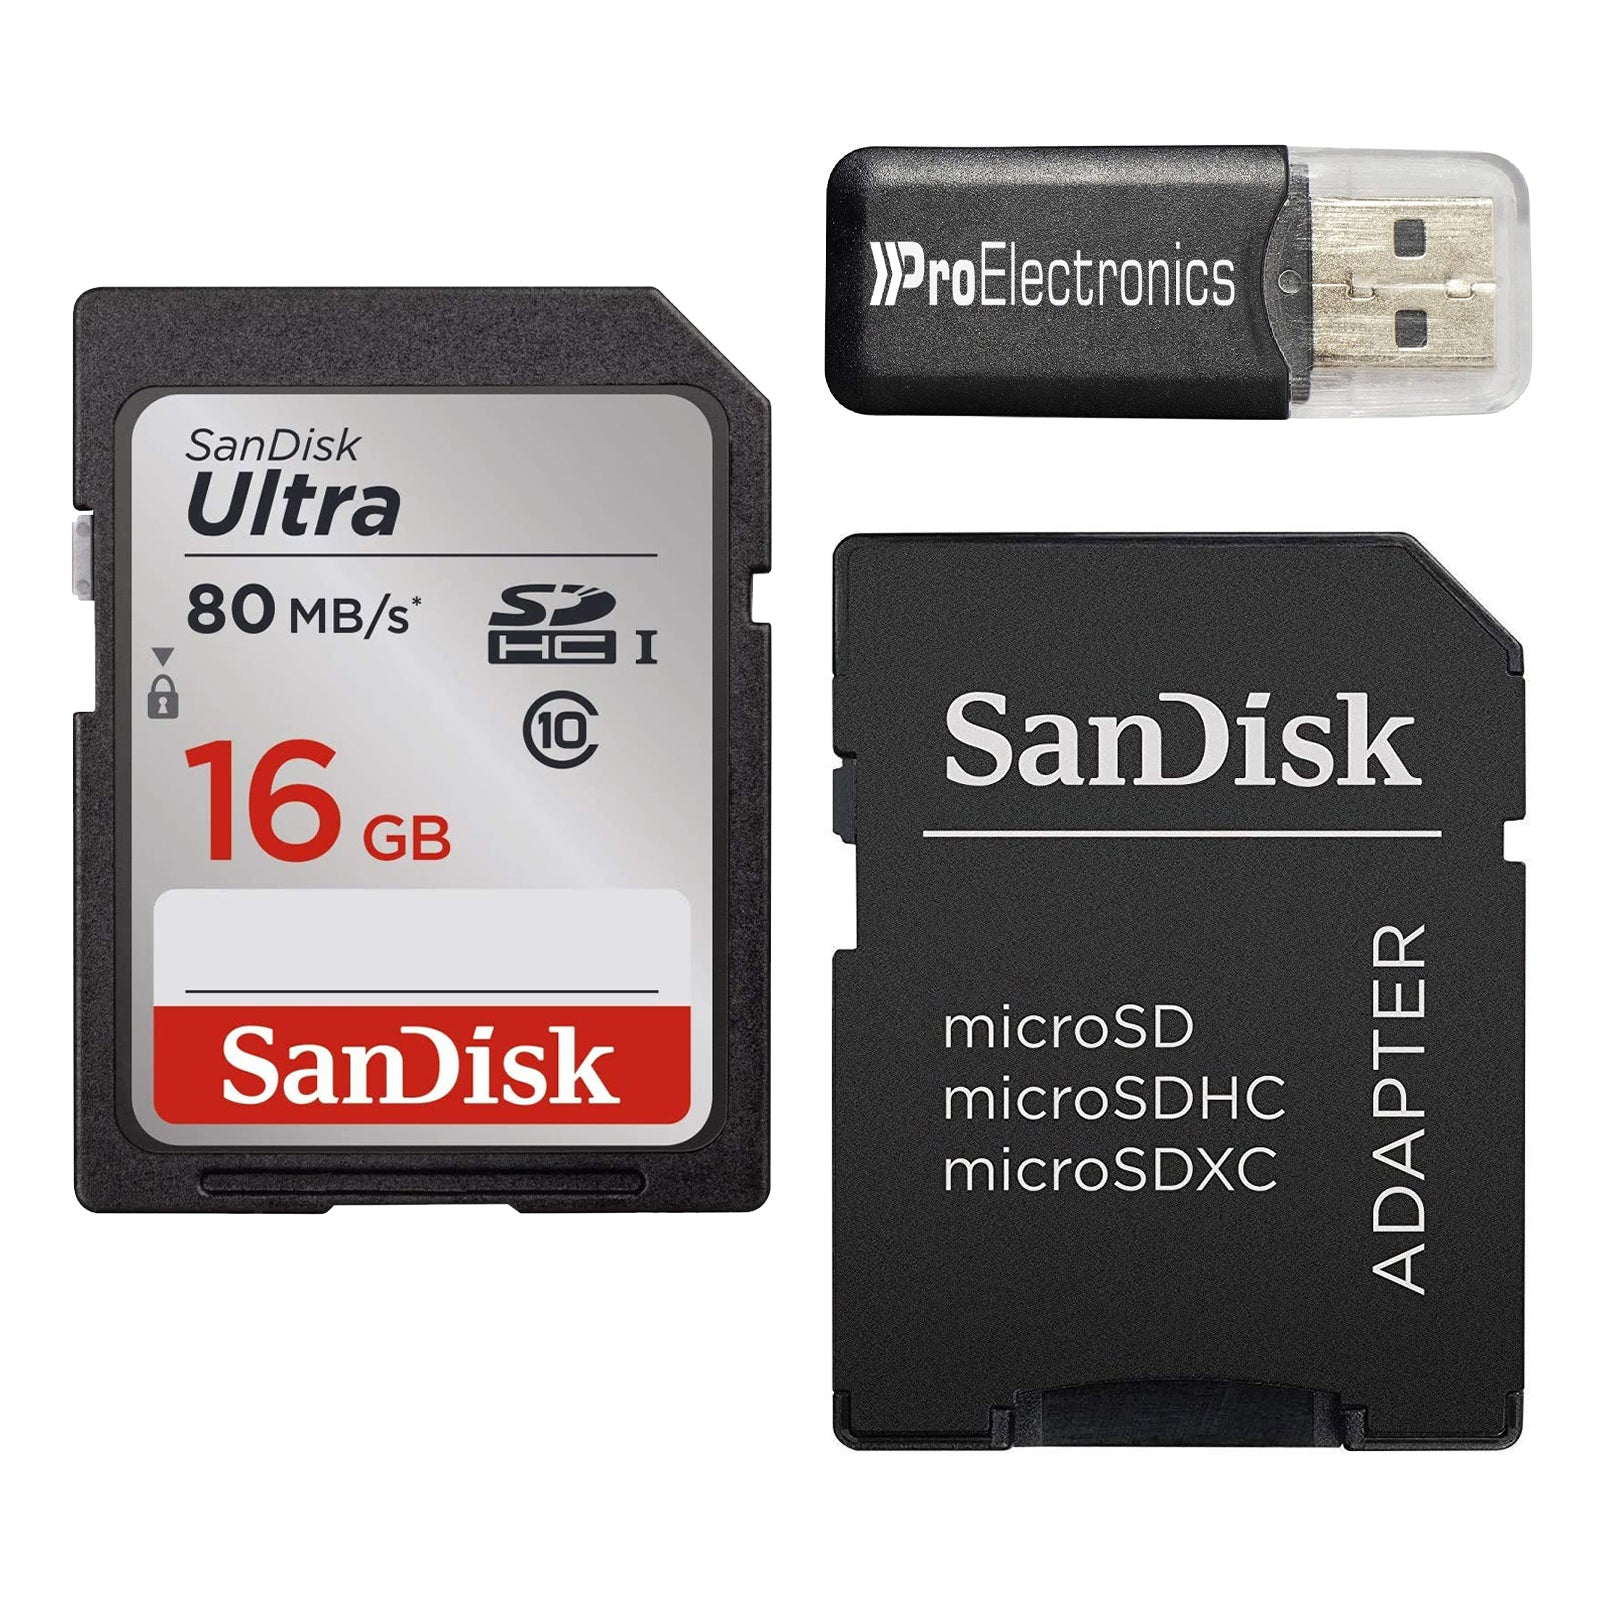 SanDisk Ultra 16GB Class 10 SDHC UHS-I Memory Card with SanDisk Micro SD to SD Adapter and microSD Reader - Pro-Distributing